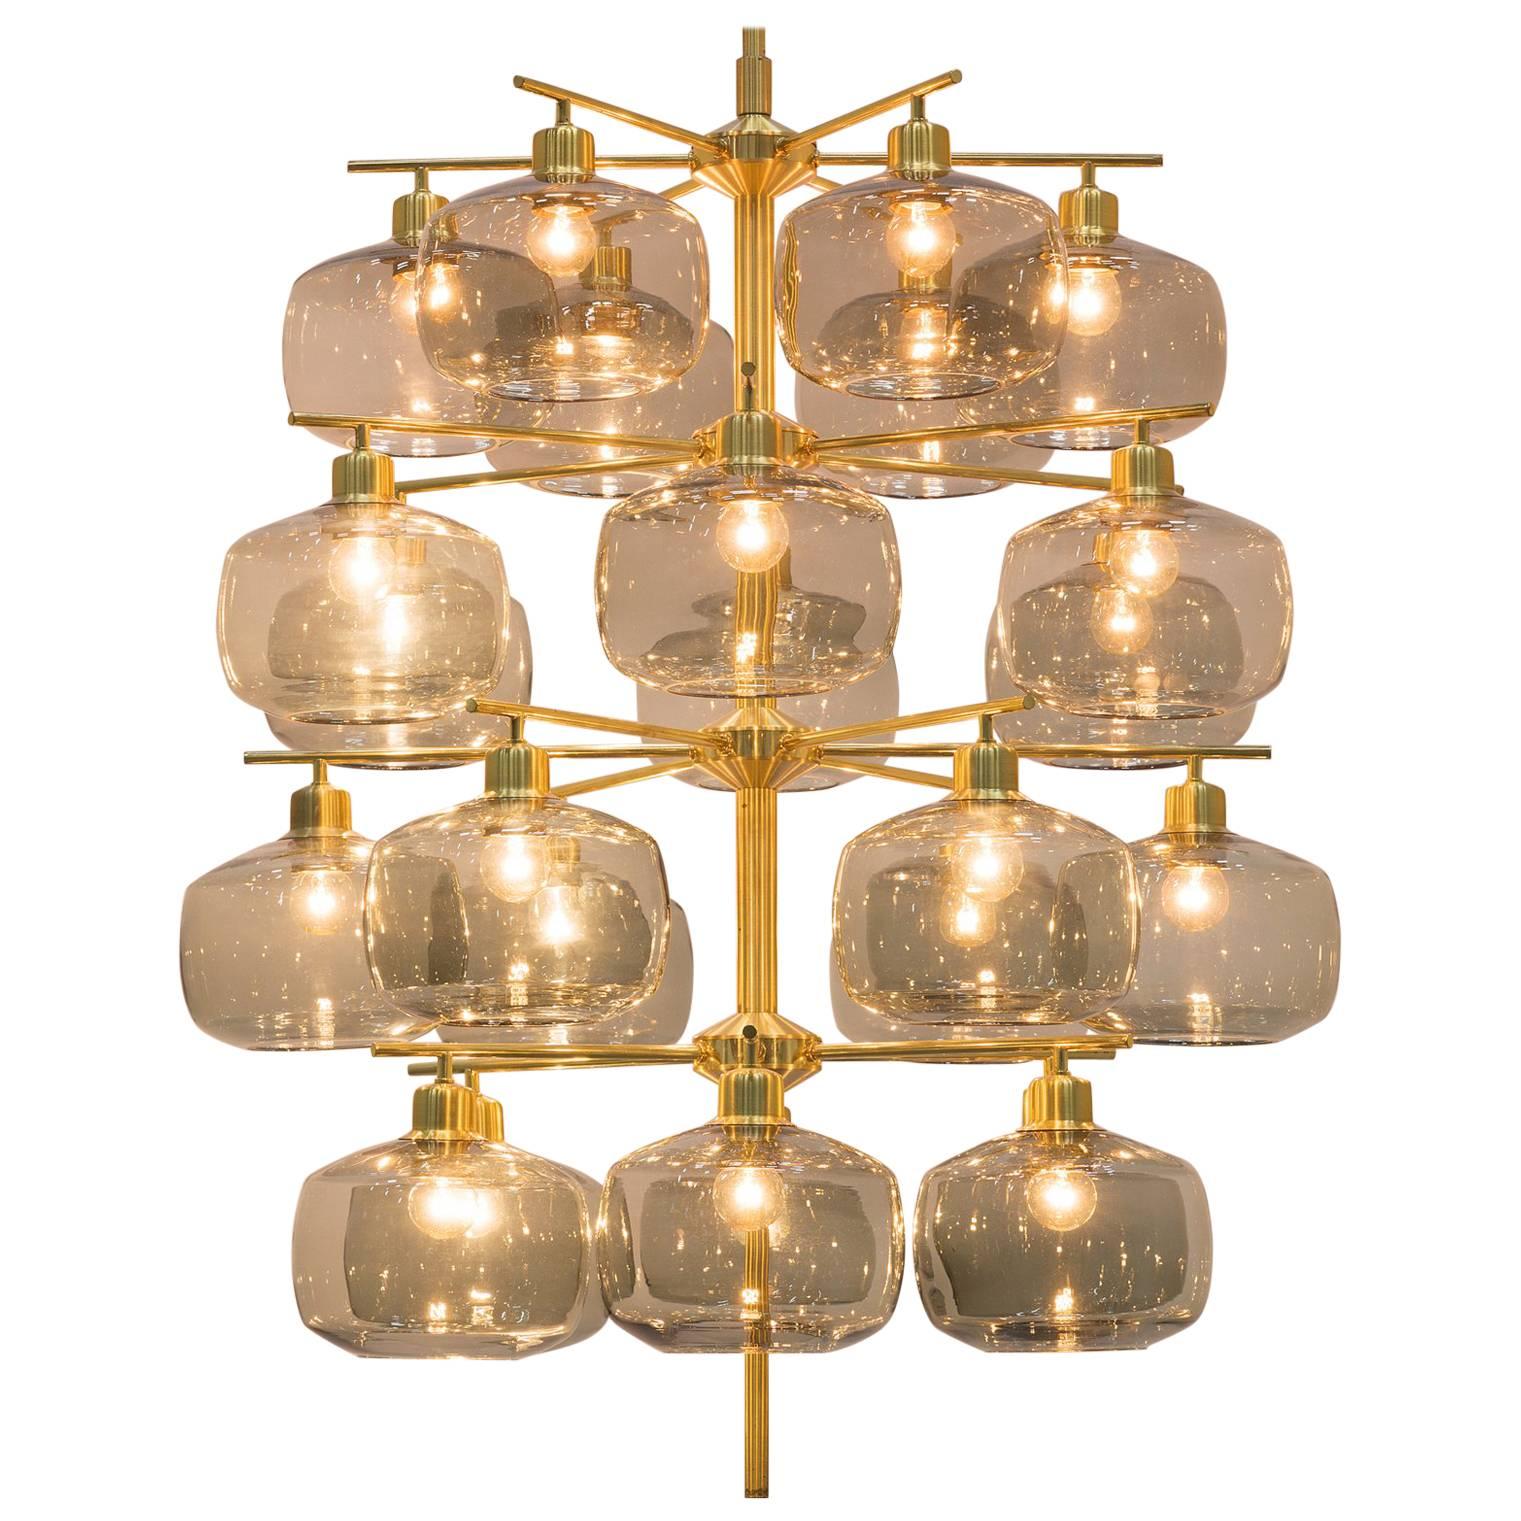 Eight Holger Johansson Chandeliers with 24 Smoked Glass Bulbs, 1952